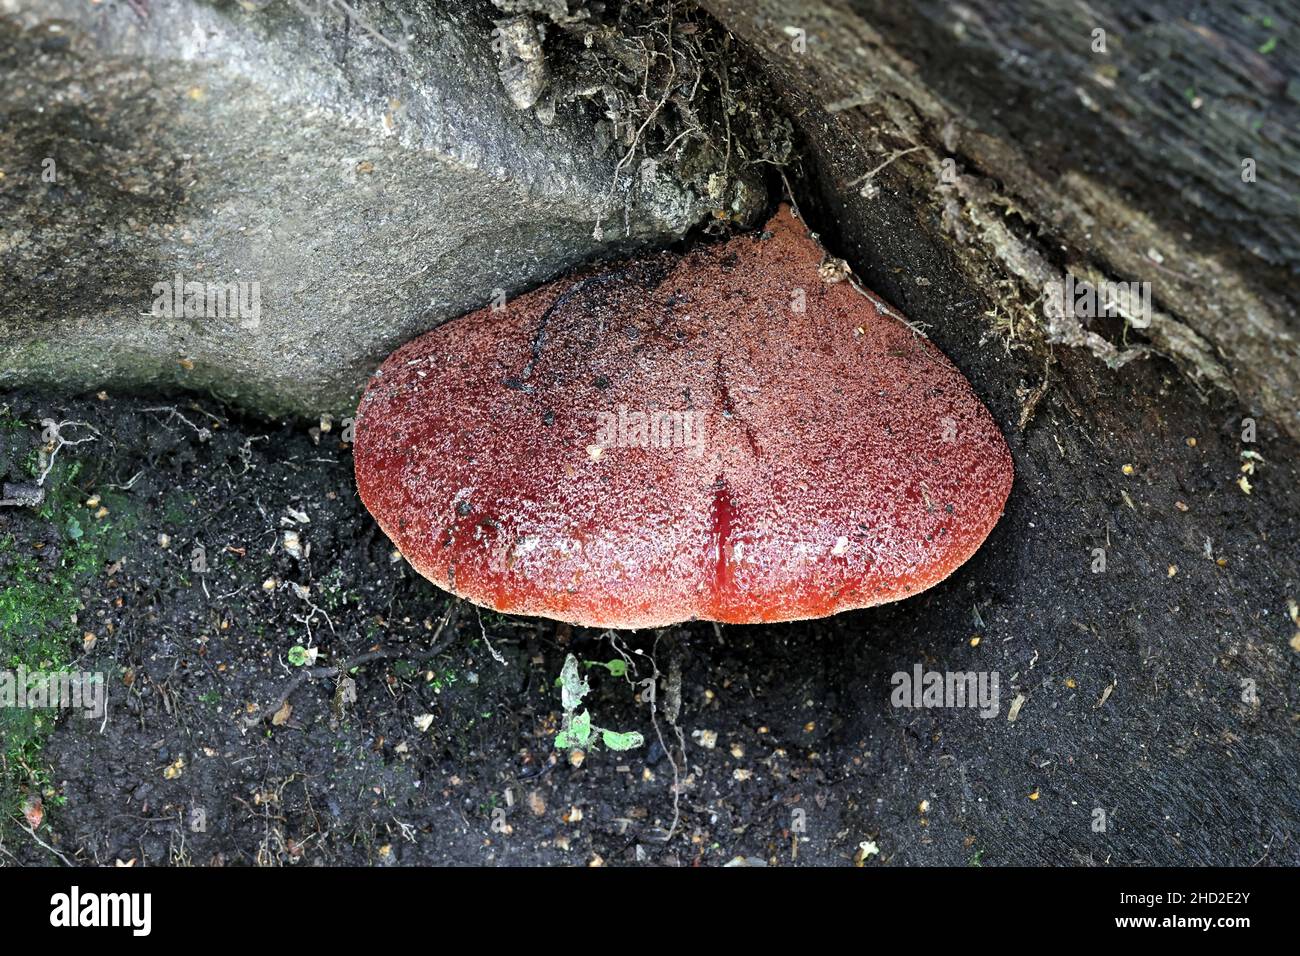 Fistulina hepatica, known as beefsteak fungus, beefsteak polypore, ox tongue, or tongue mushroom, wild polypore from Finland Stock Photo